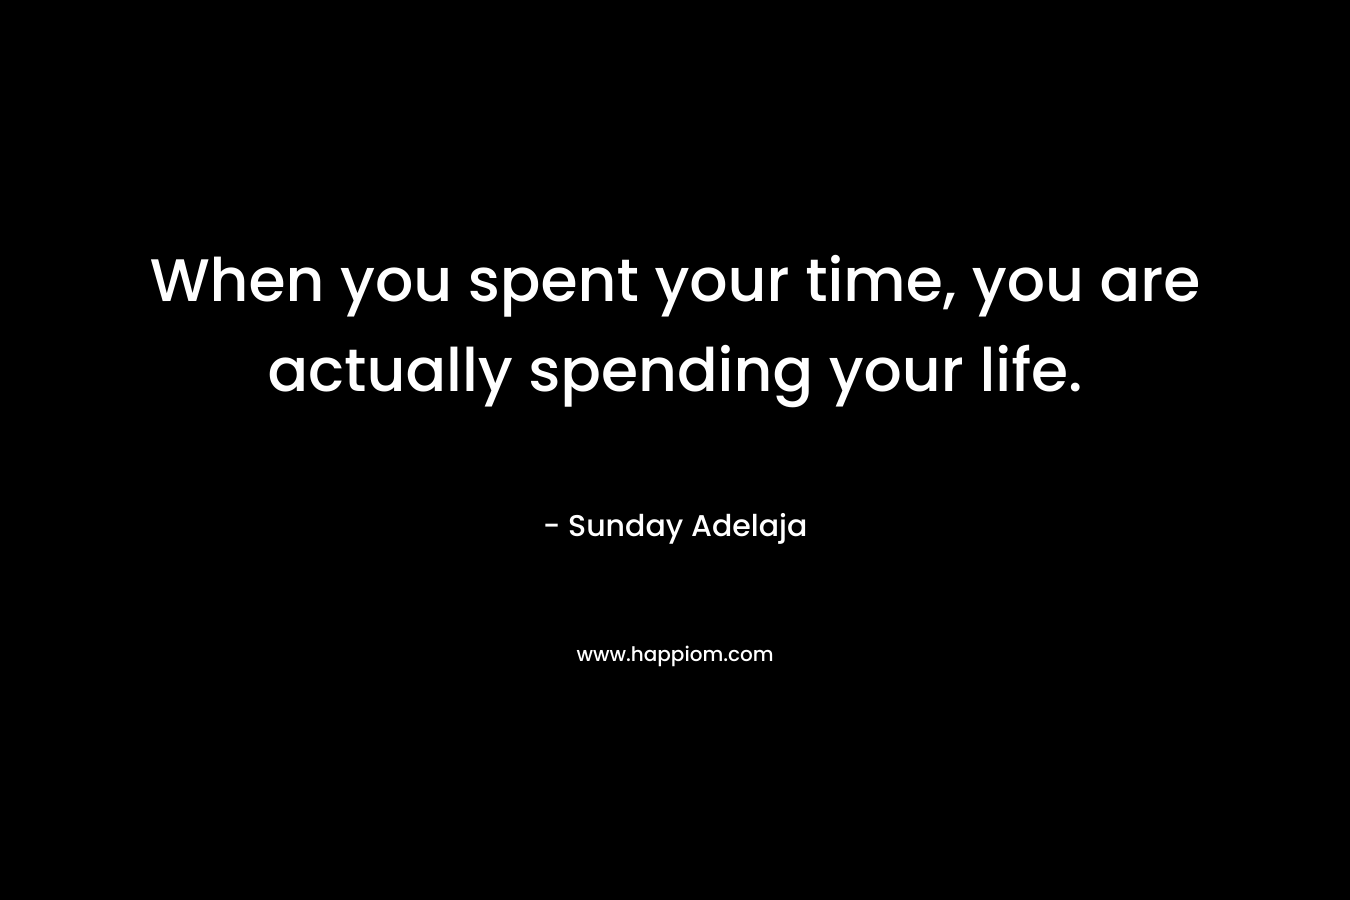 When you spent your time, you are actually spending your life.